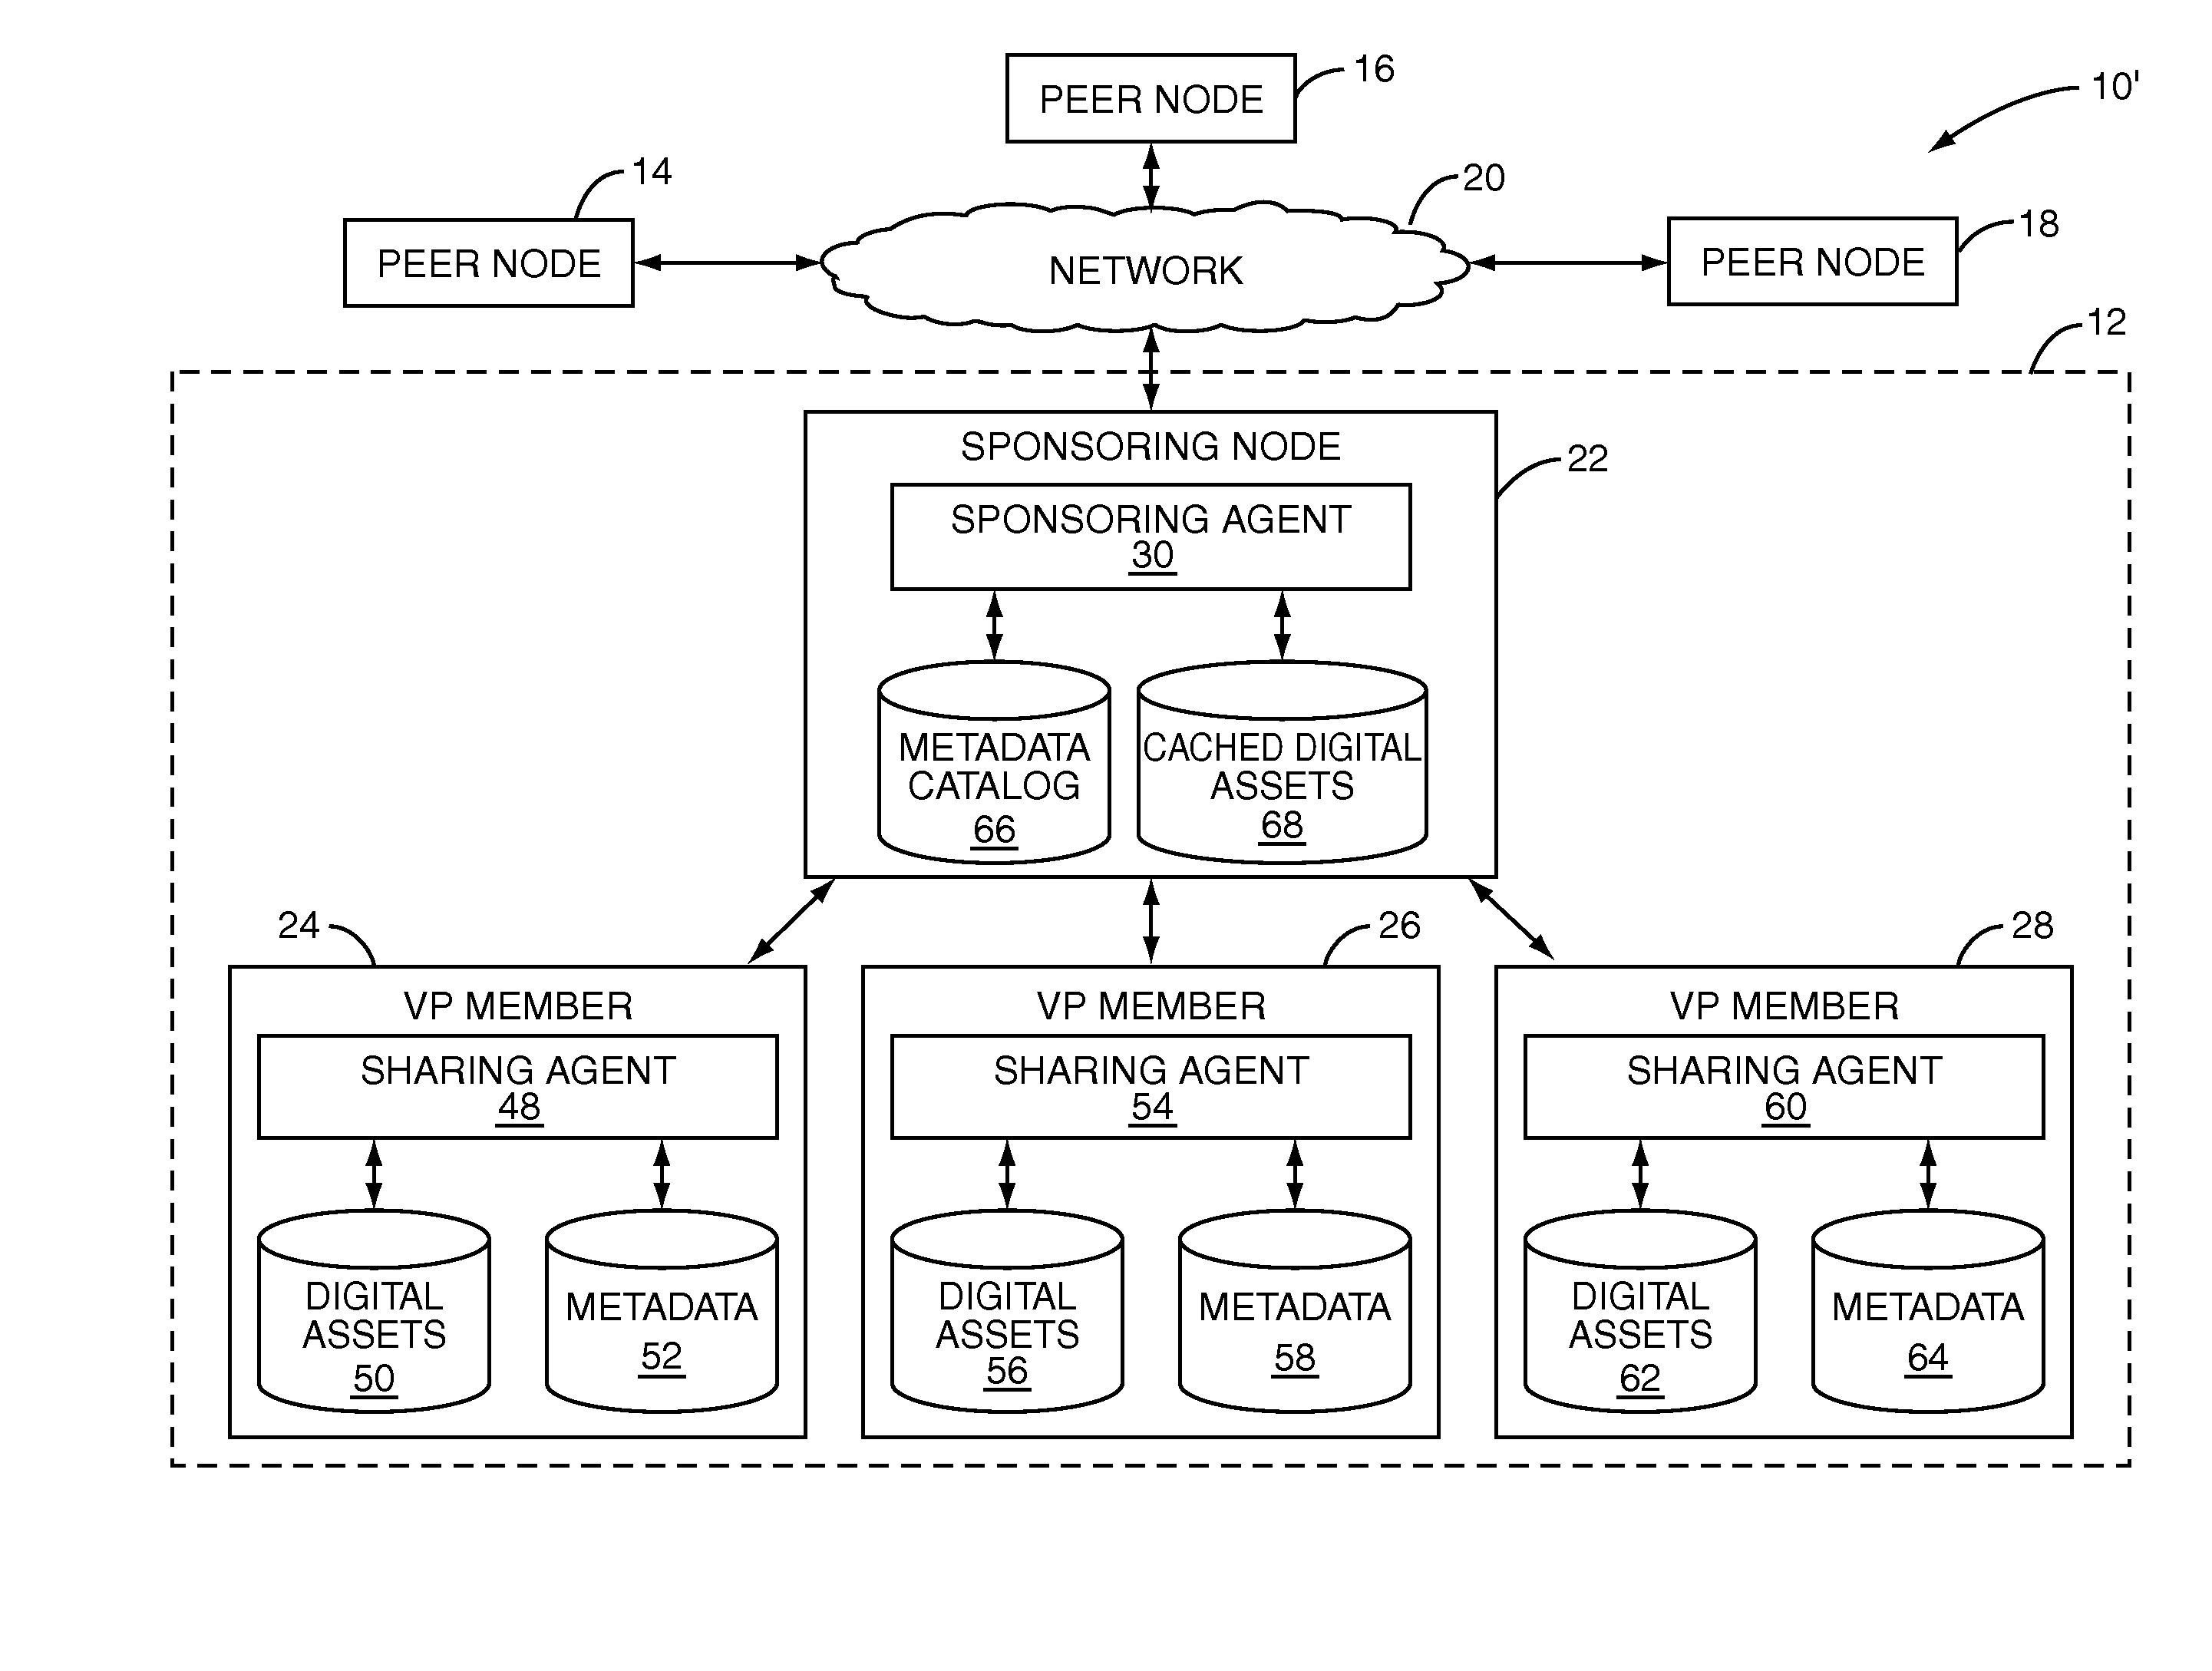 Virtual peer for a content sharing system